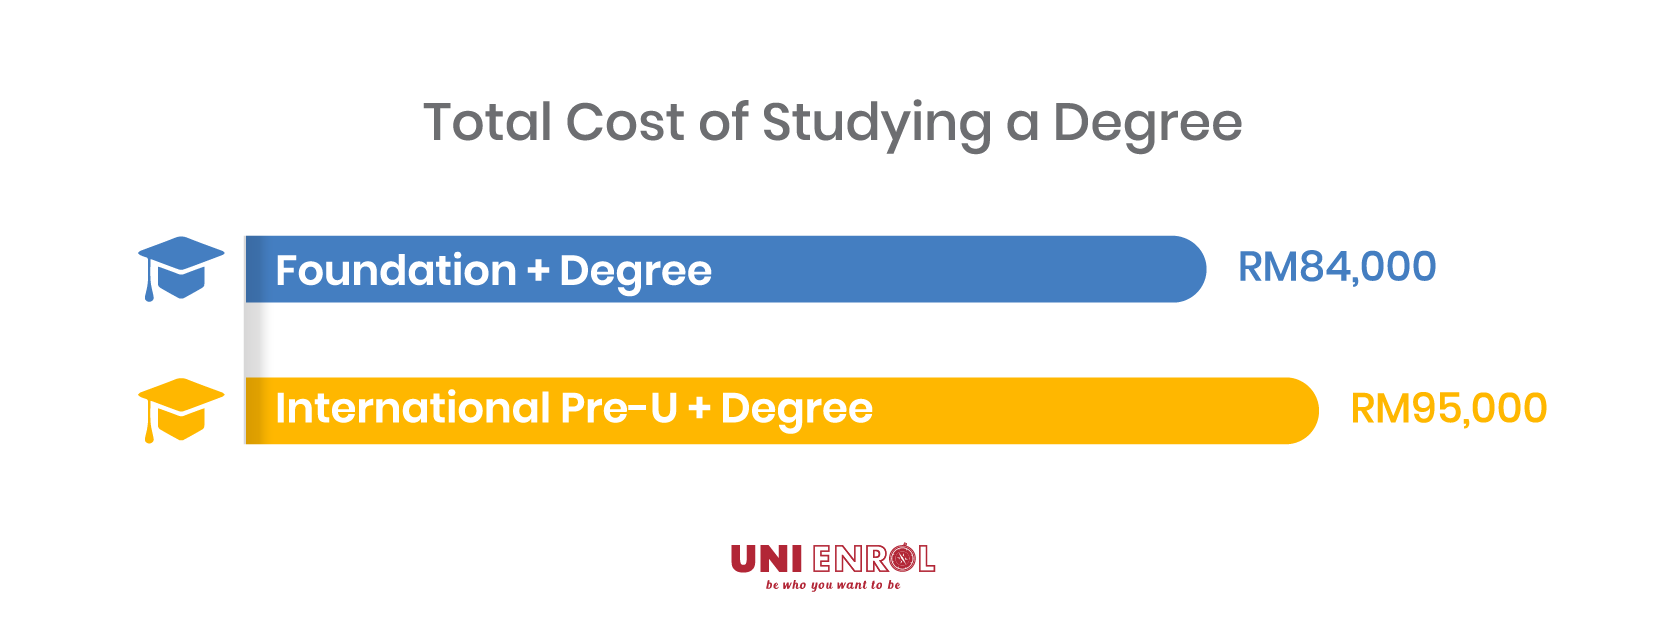 Contact our Uni Enrol counsellors to find a degree course that fits your budget.